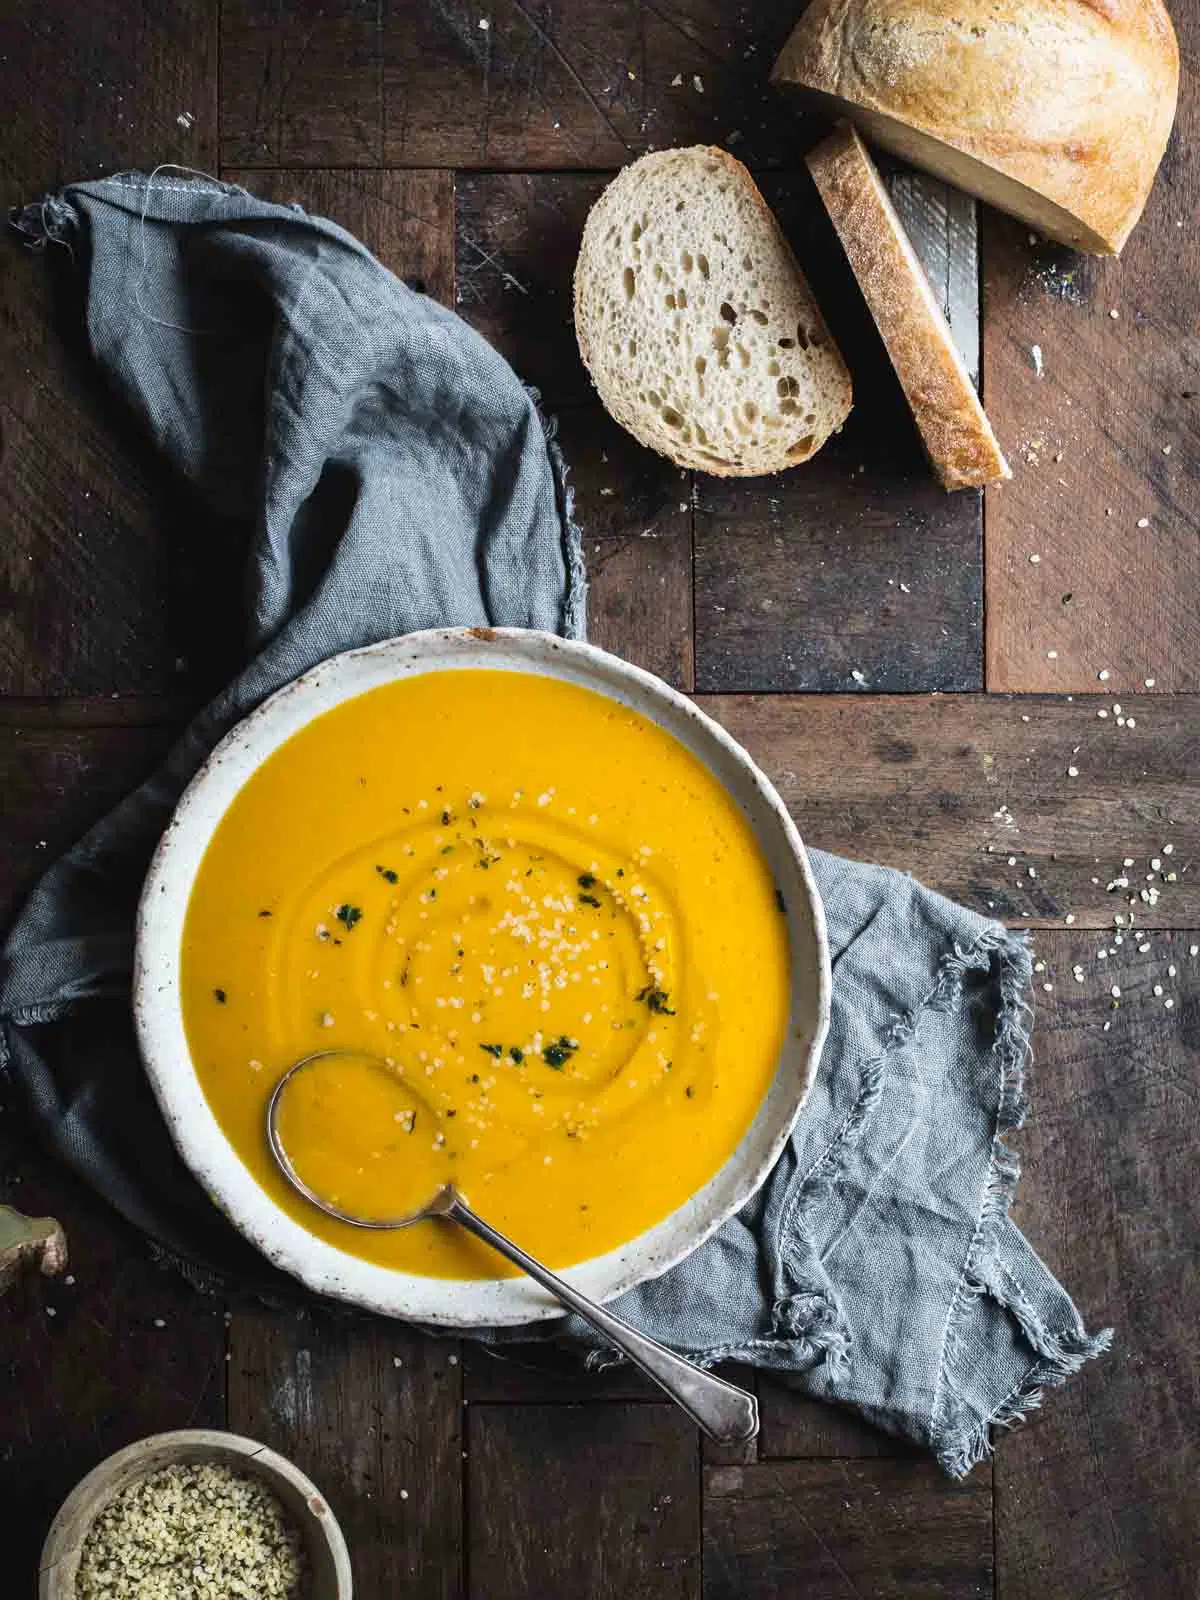 Pumpkin soup in a bowl with bread.